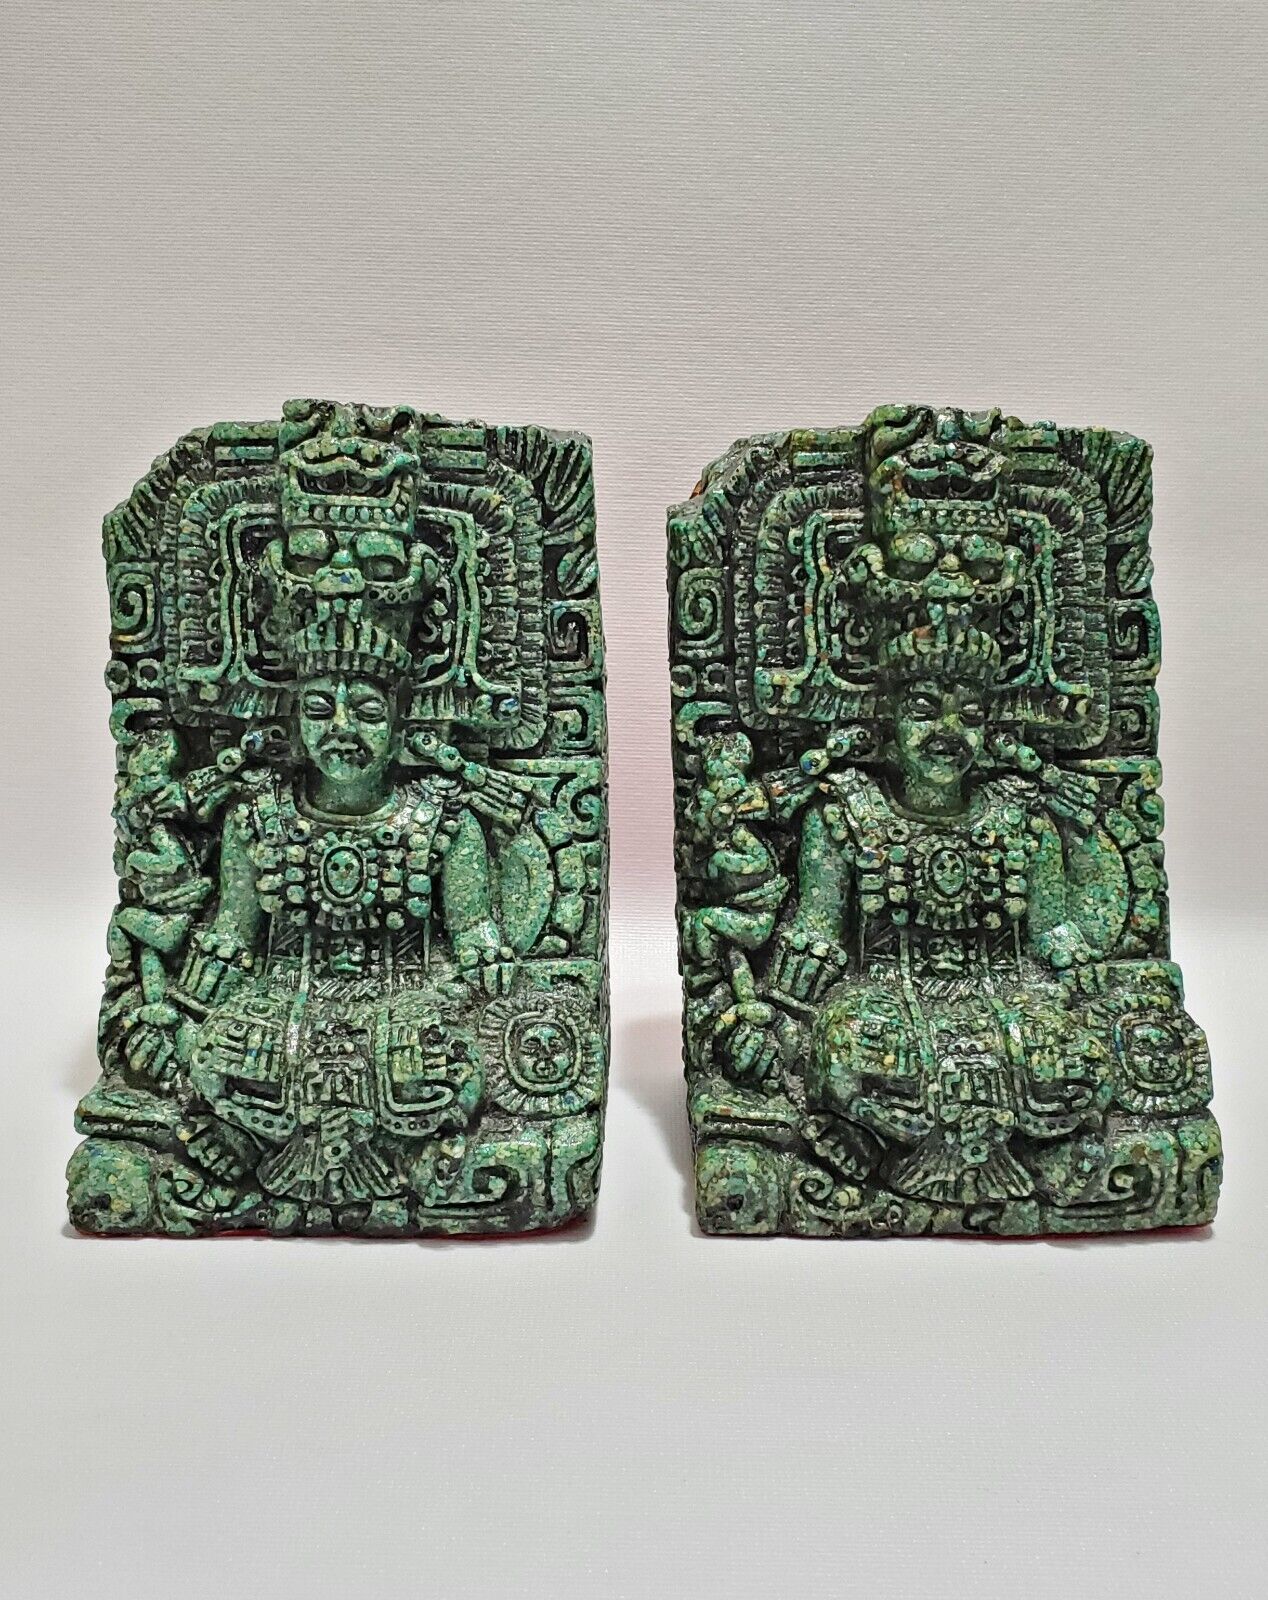 Vintage 1960s Crushed Malachite, Green Stone, Aztec, Mayan Art Bookends, Mexico